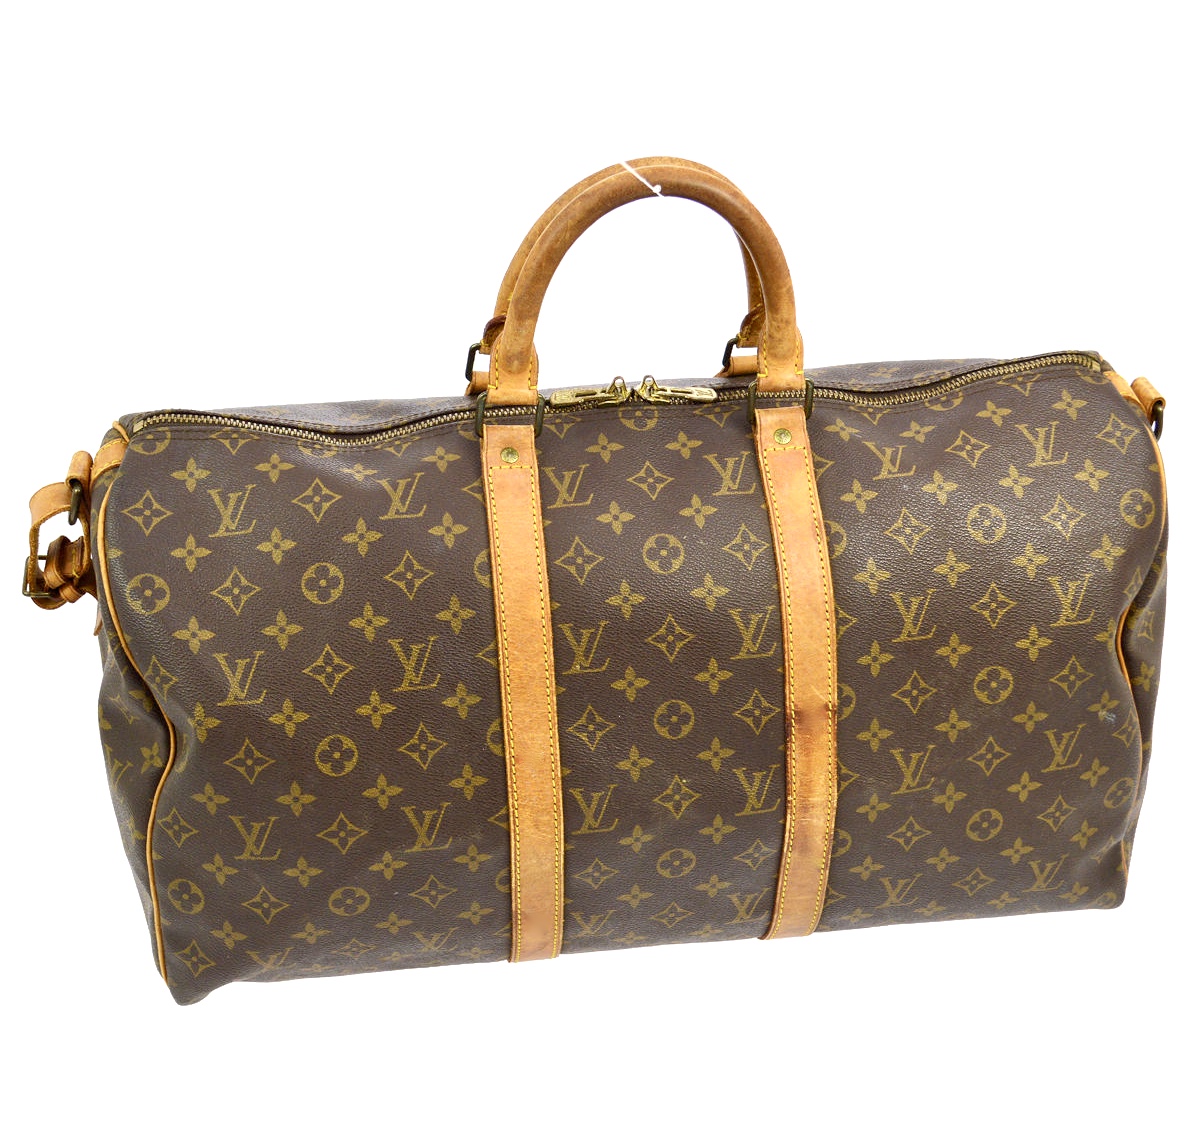 Louis Vuitton Takeoff Keepall 50 Duffle Bag Khaki. Available In Brand New  Condition. Made in France 🇫🇷 . $4500 𝐒𝐡𝐢𝐩𝐩𝐞𝐝 𝐒𝐚𝐥